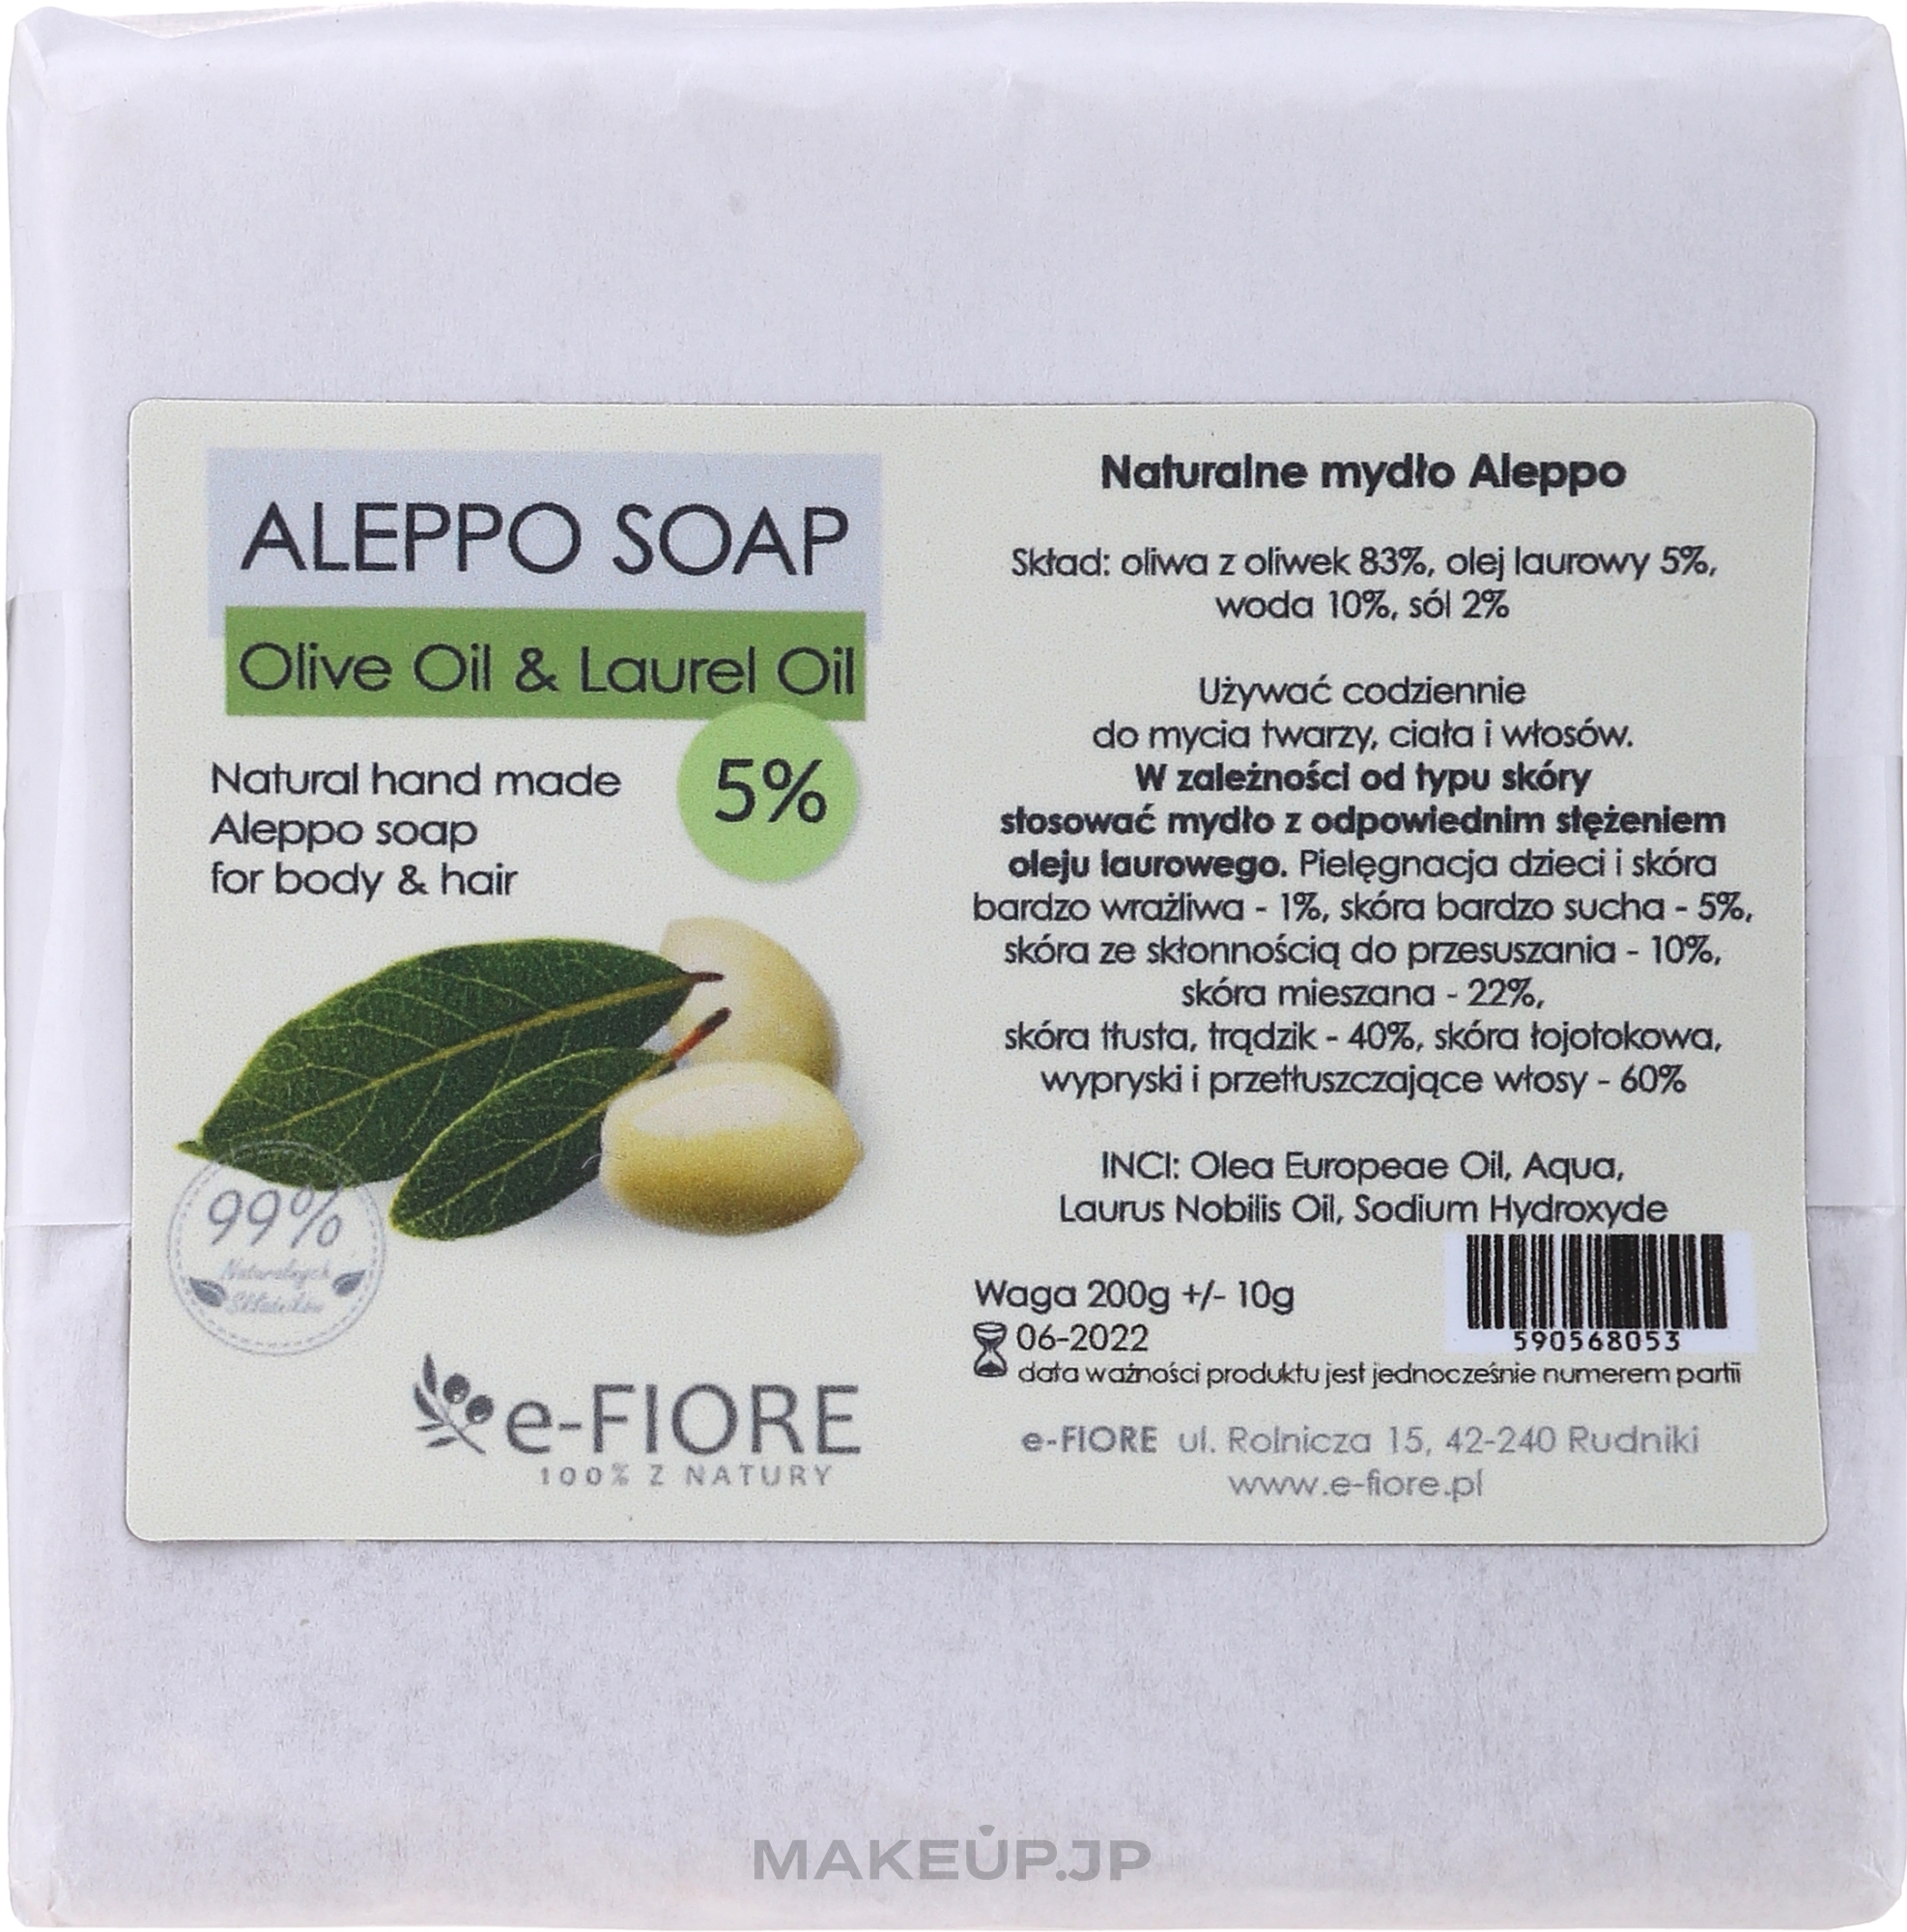 Aleppo Soap "Olive-Laurel 5%" for Dry and Sensitive Skin - E-Fiore Aleppo Soap Olive-Laurel 5% — photo 200 g